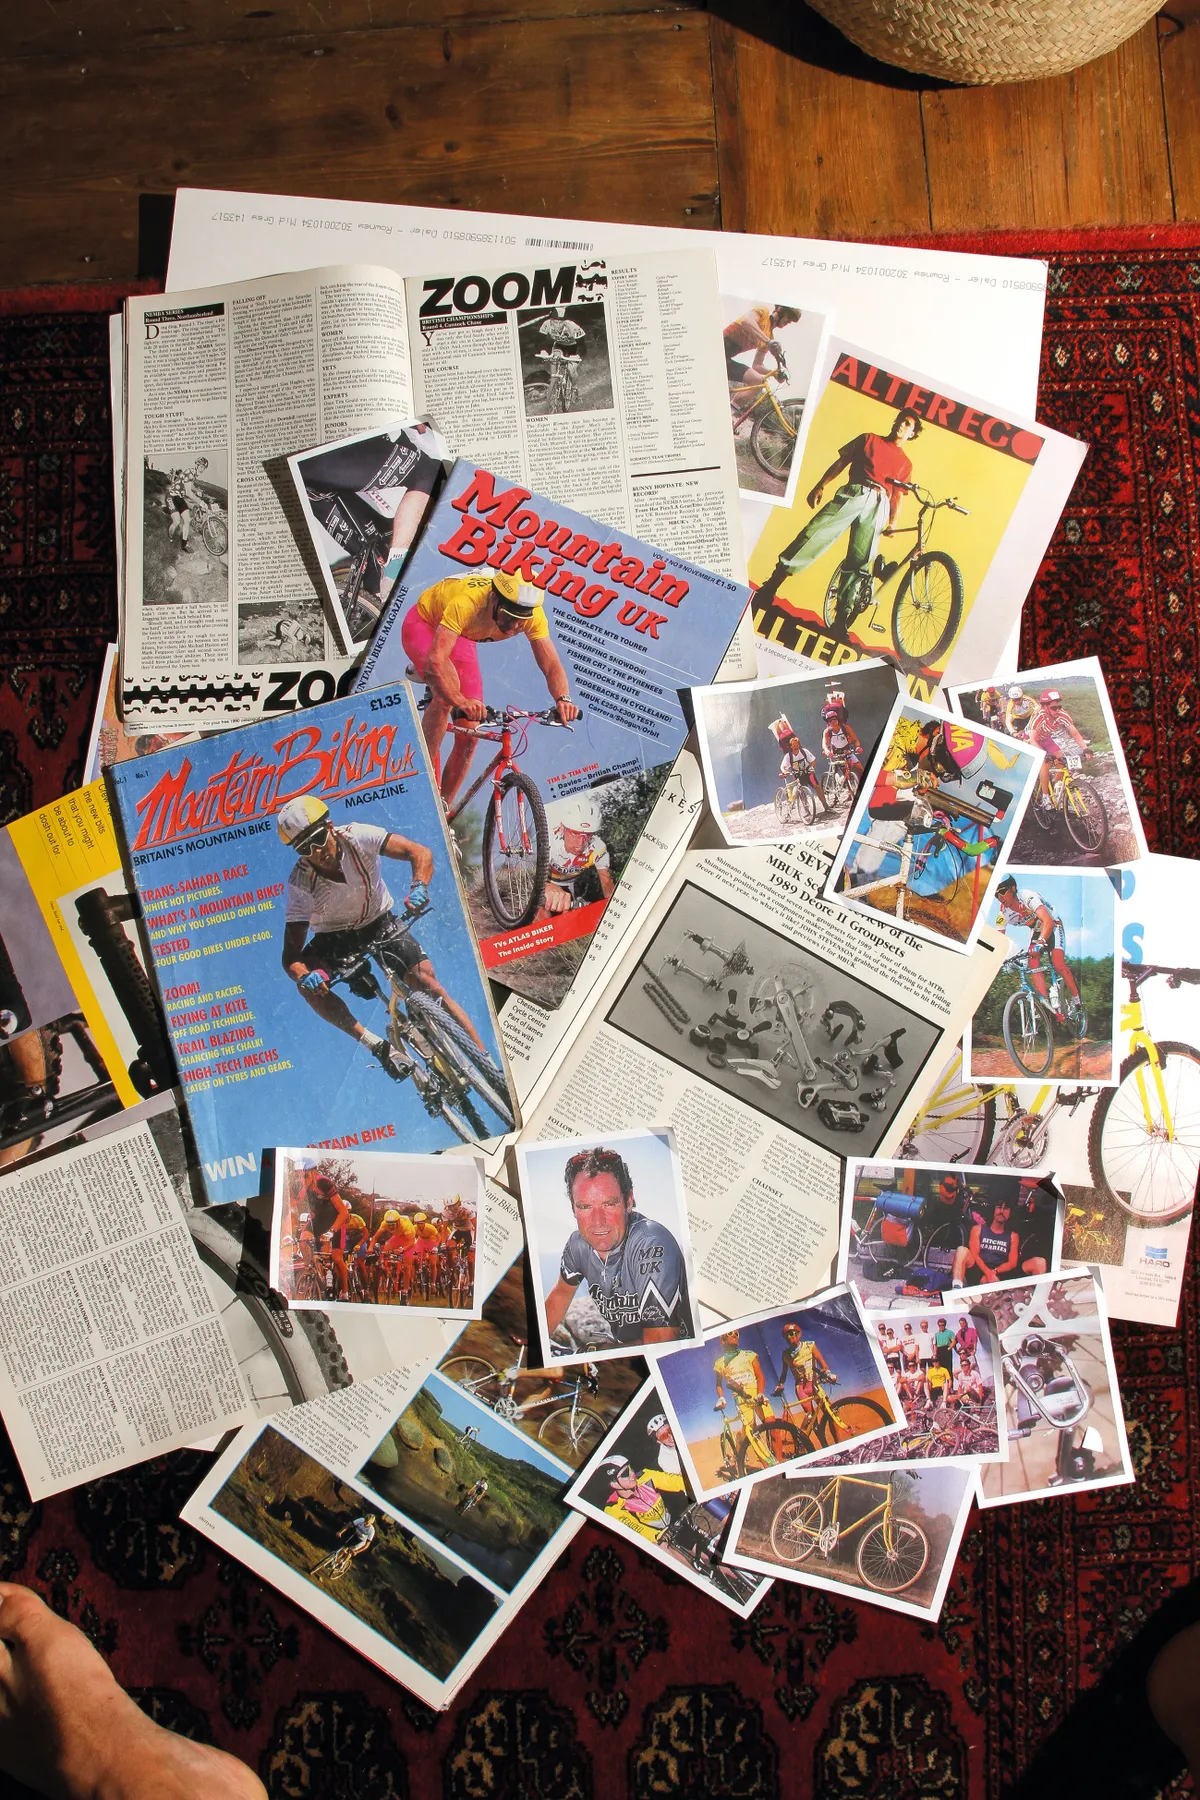 Copies of MBUK magazine from the 1980s